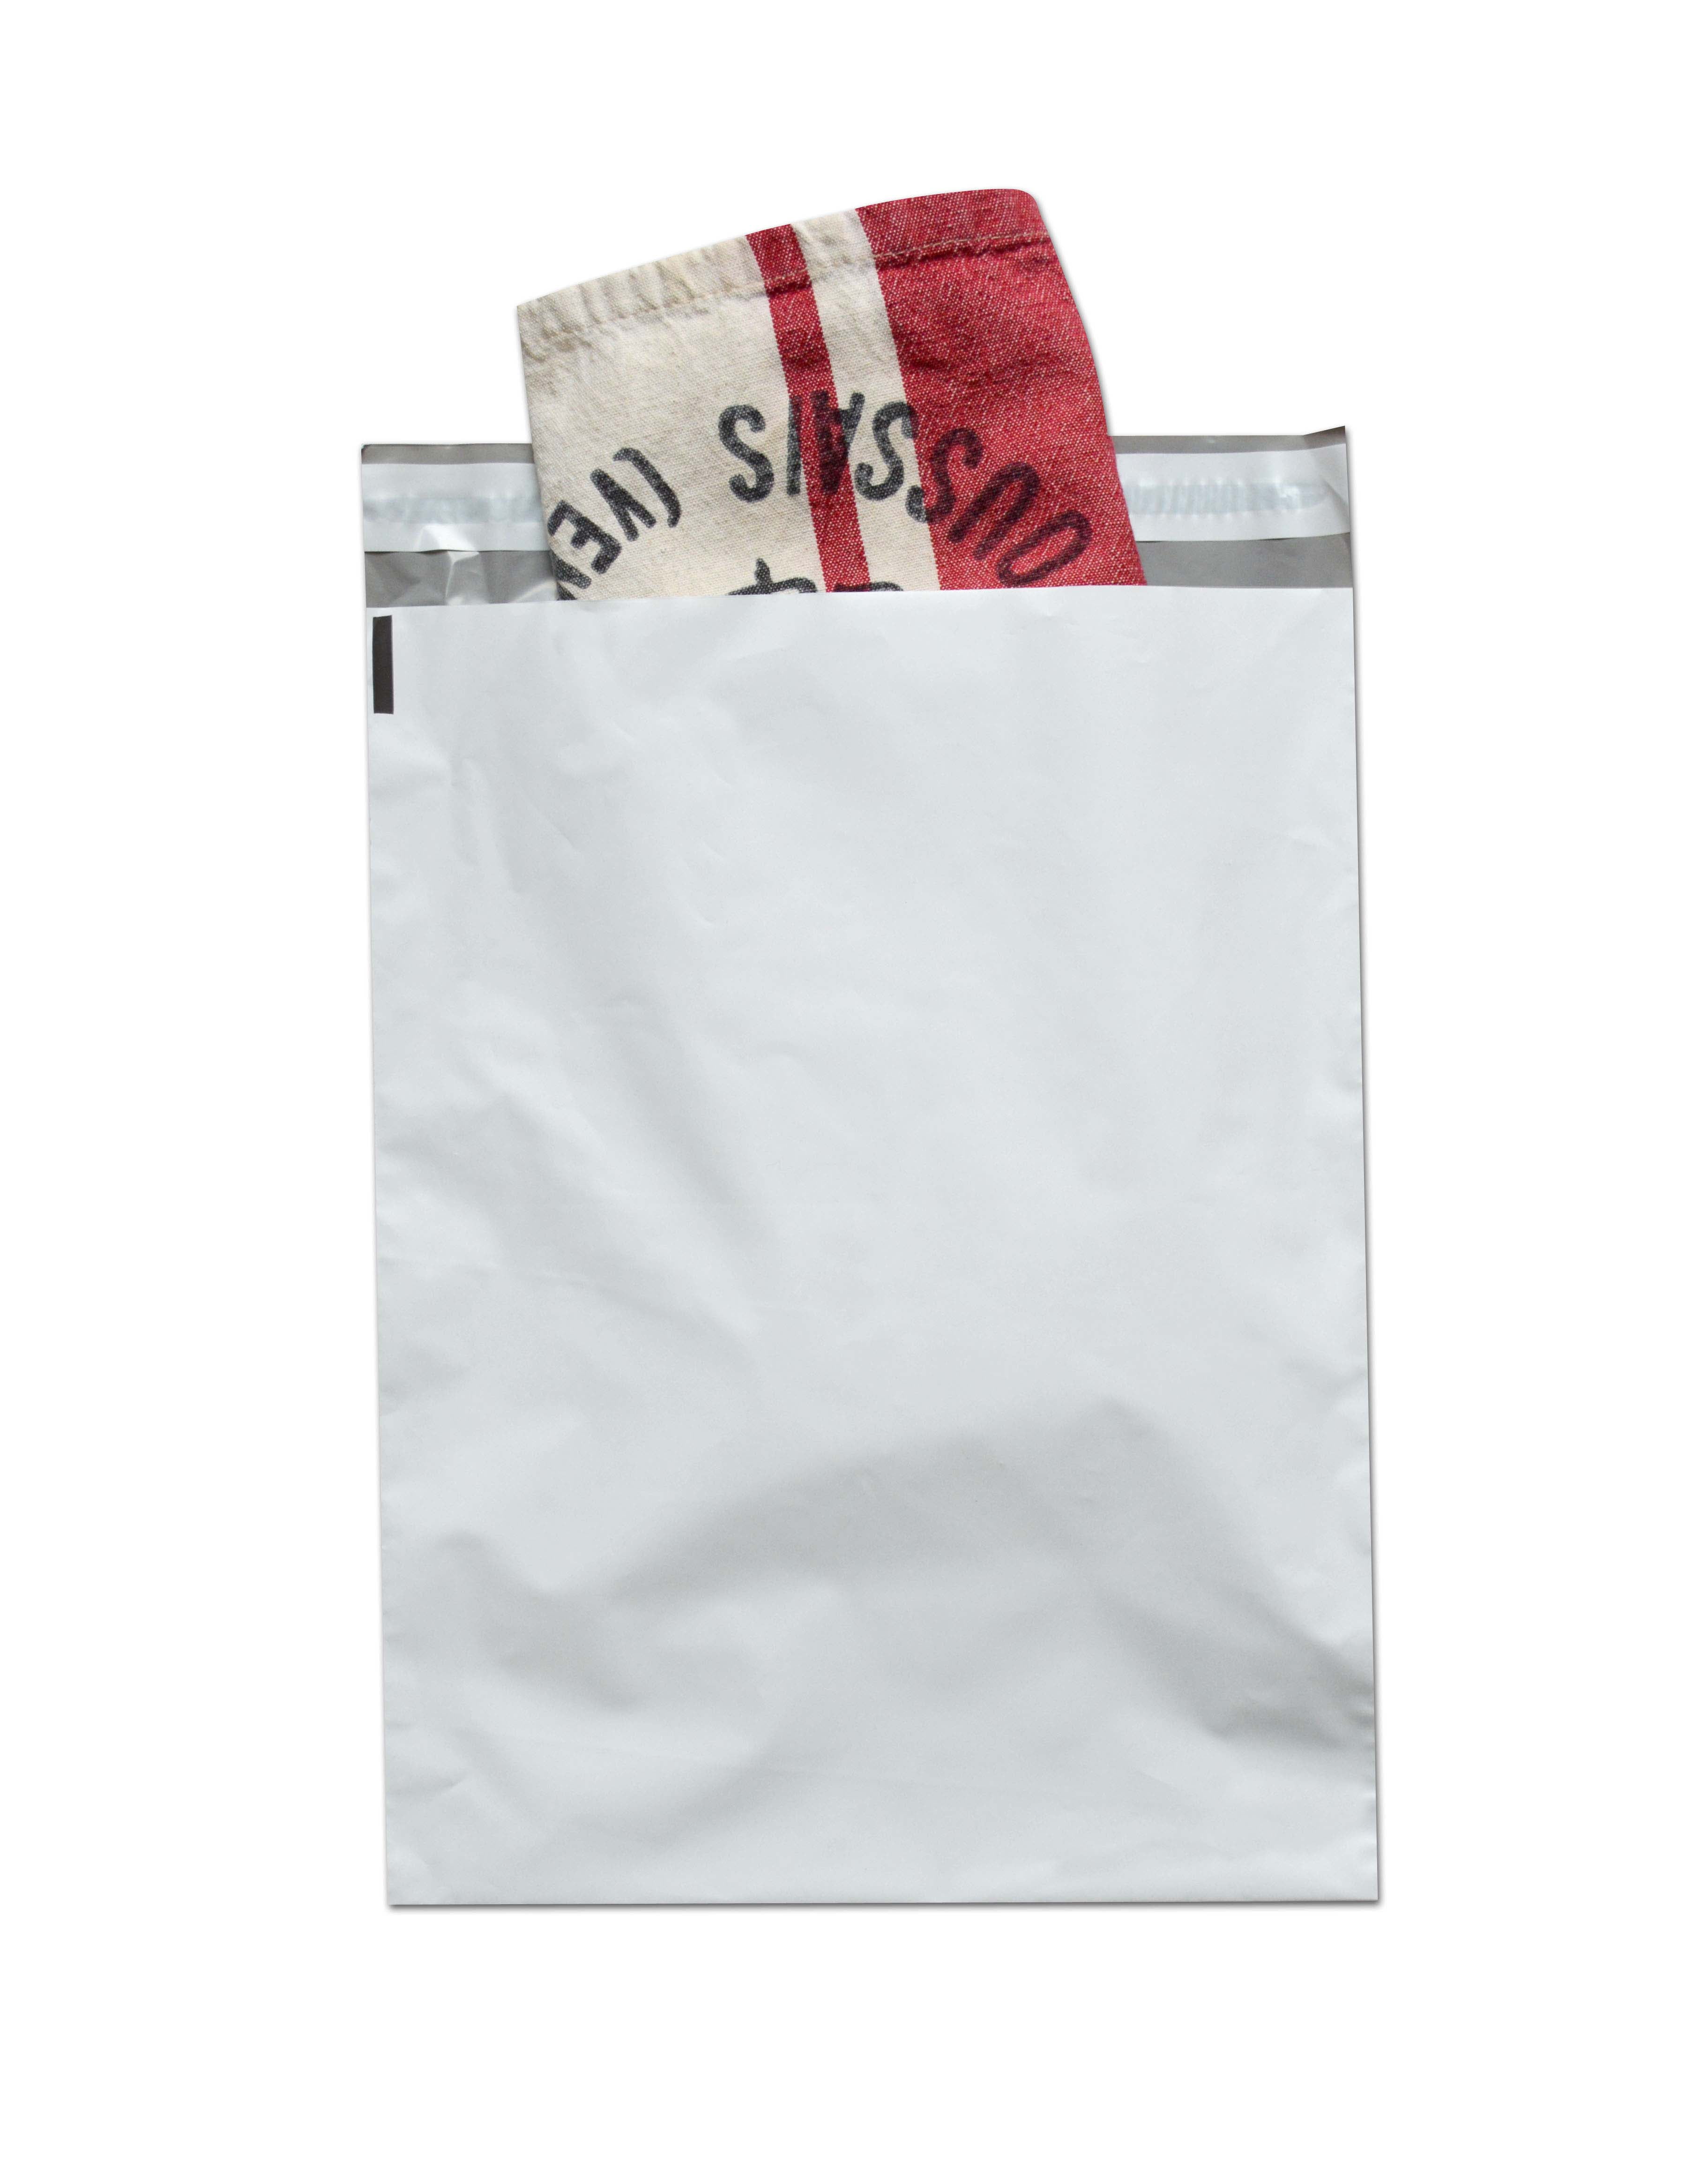 200 10x13 Poly Mailers Envelopes Boutique Custom Bags USA Seller 